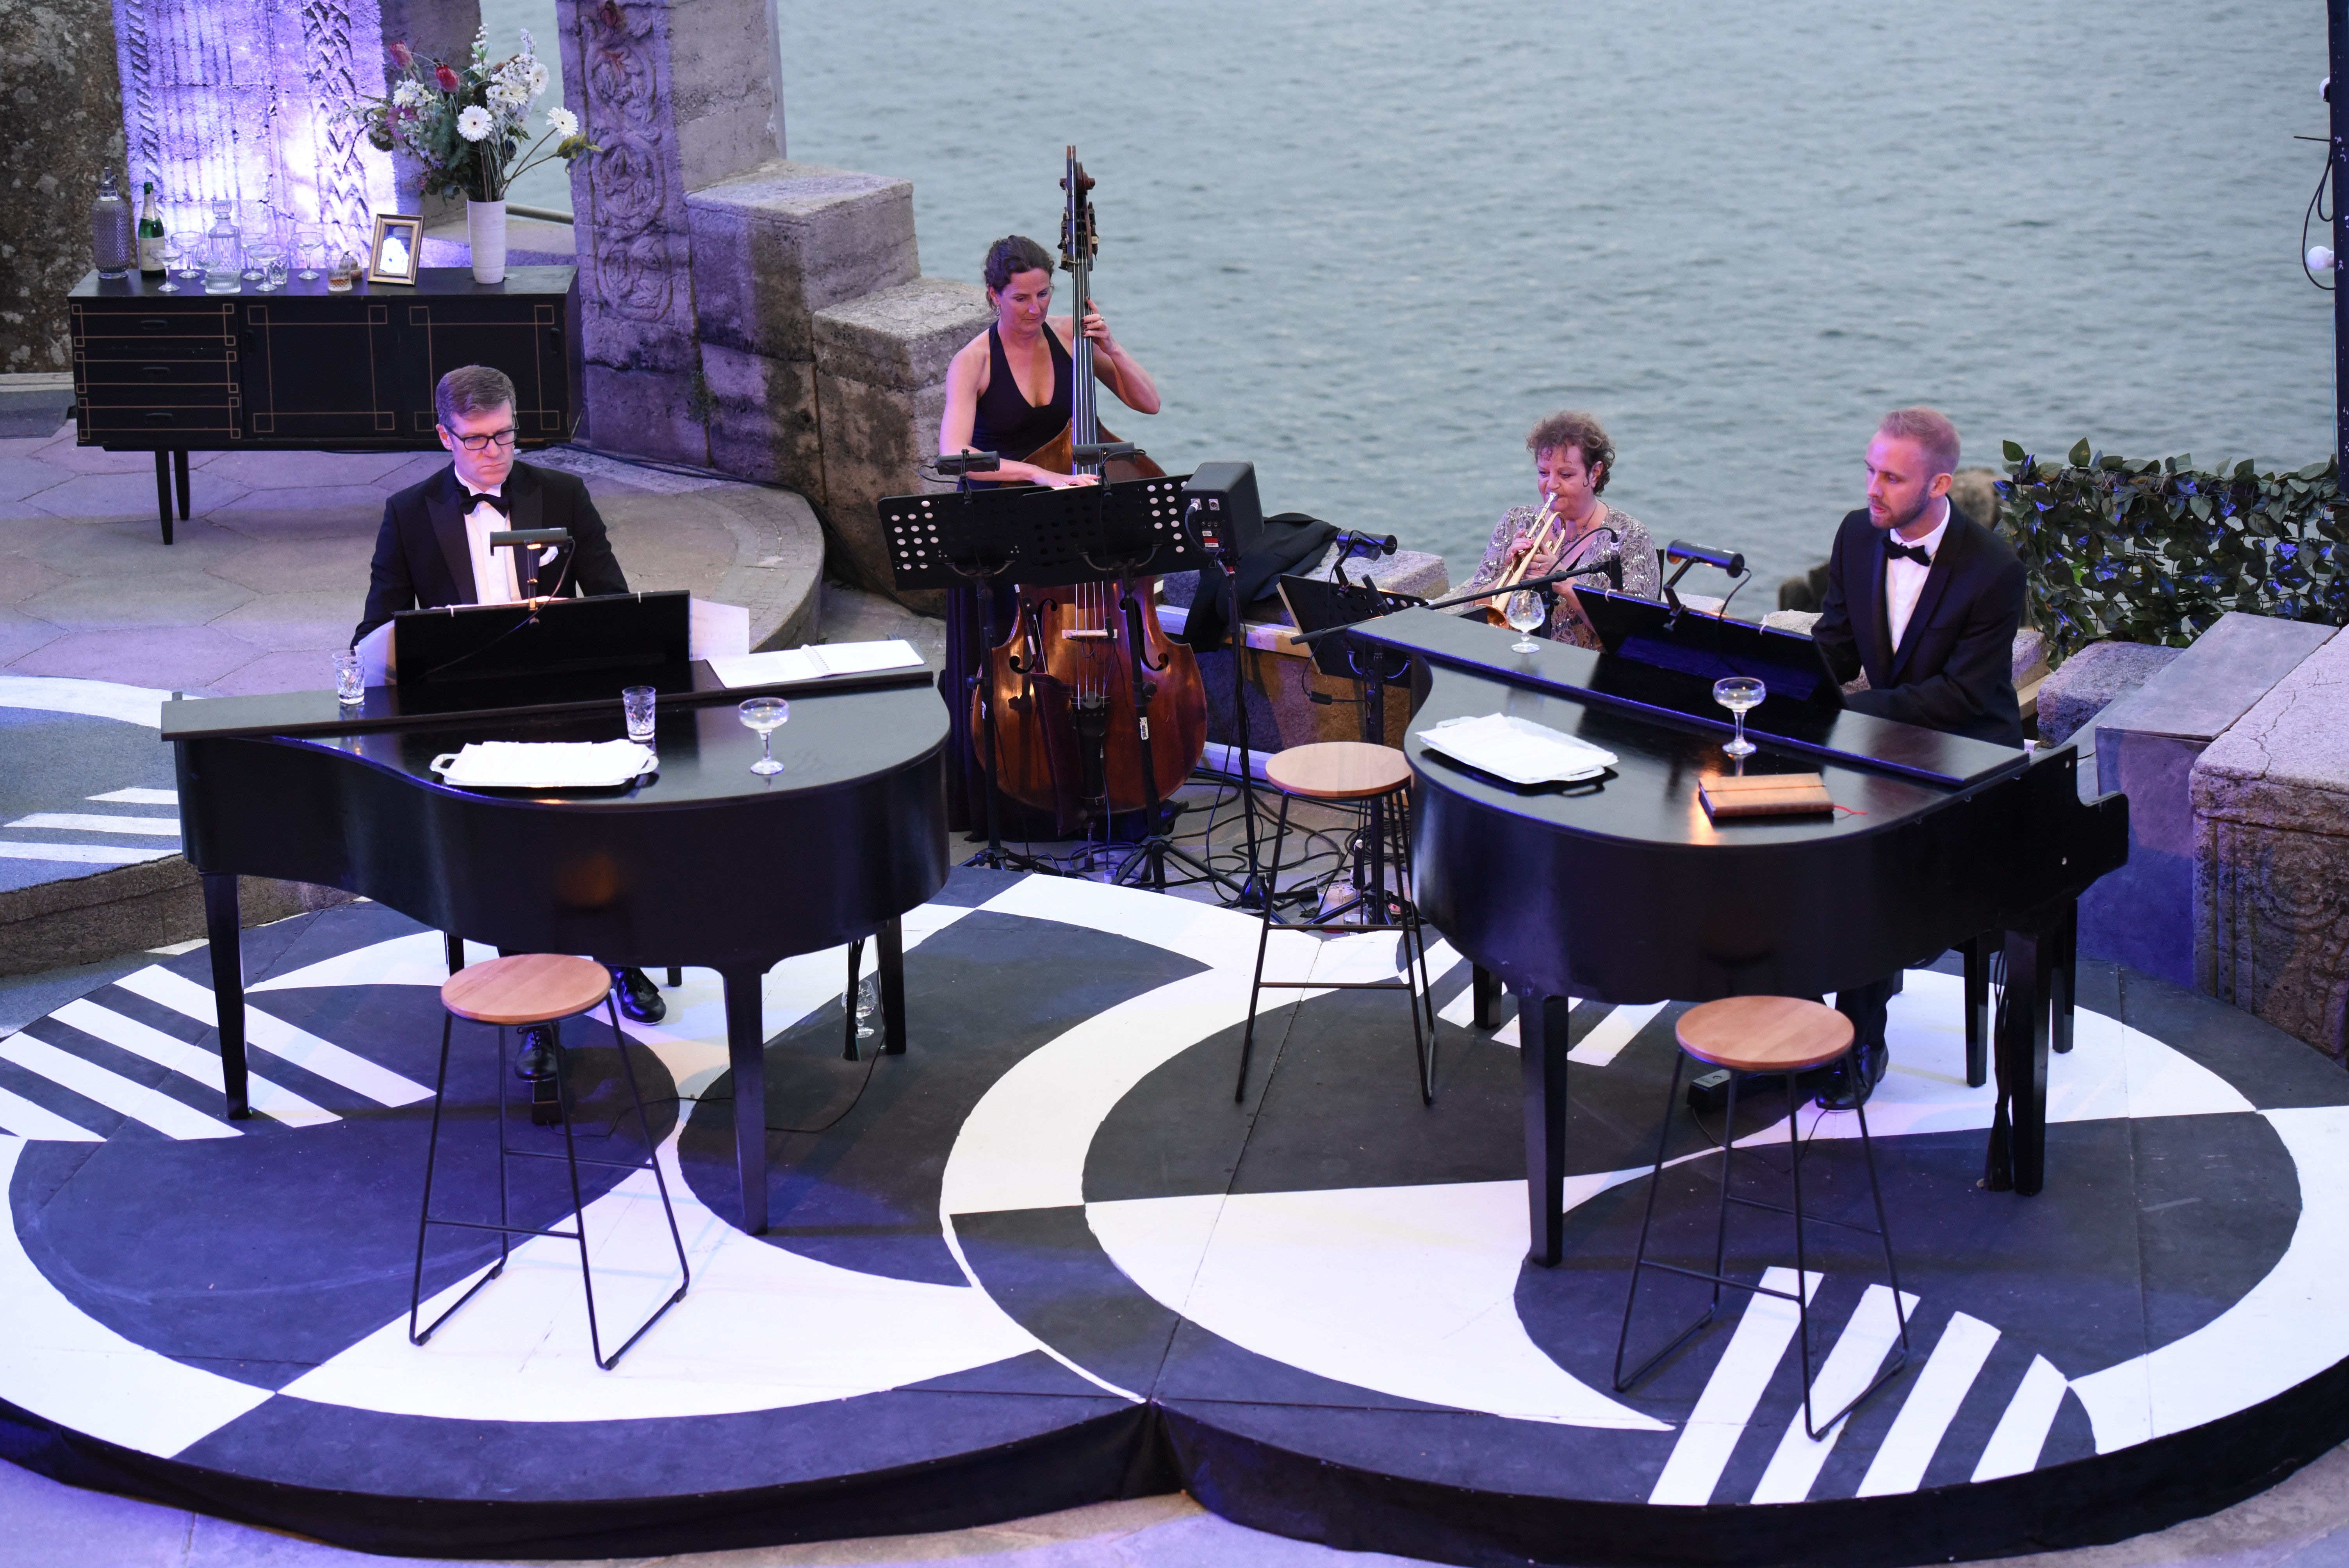 Annette Brown playing the trumpet in Sedos' 2019 production of A Swell Party at the Minack Theatre in Cornwall